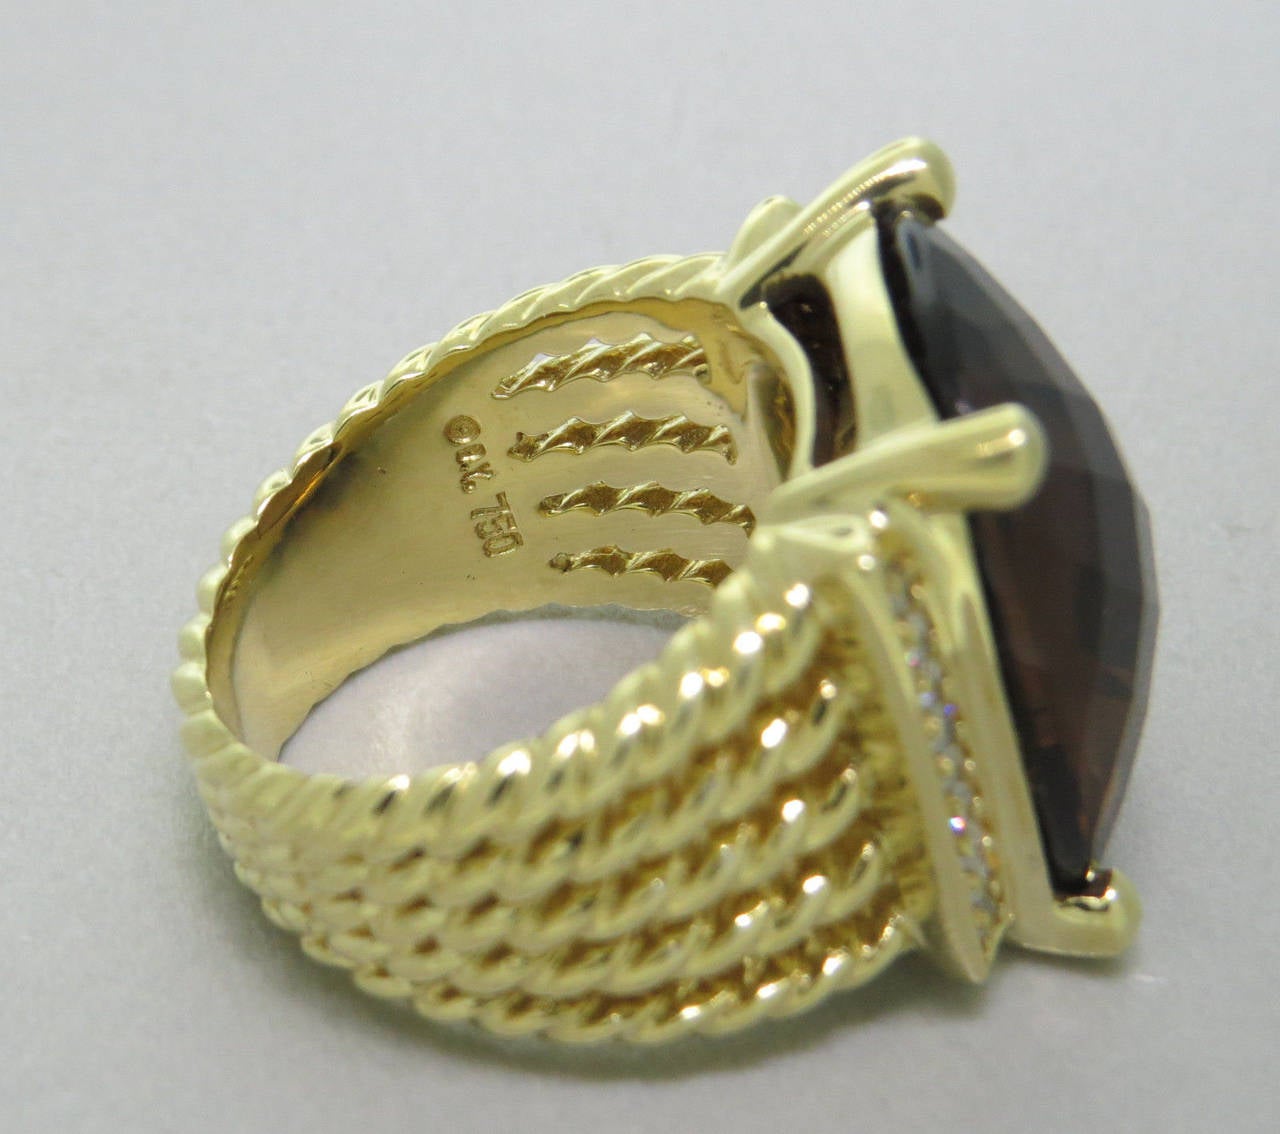 Beautiful David Yurman 18K yellow gold Wheaton ring featuring a large smokey quartz decorated with approx. 0.24ctw of H/VS diamonds. Ring size 7, ring top is 20mm x 17mm.  The weight of the piece is 20.7 grams.